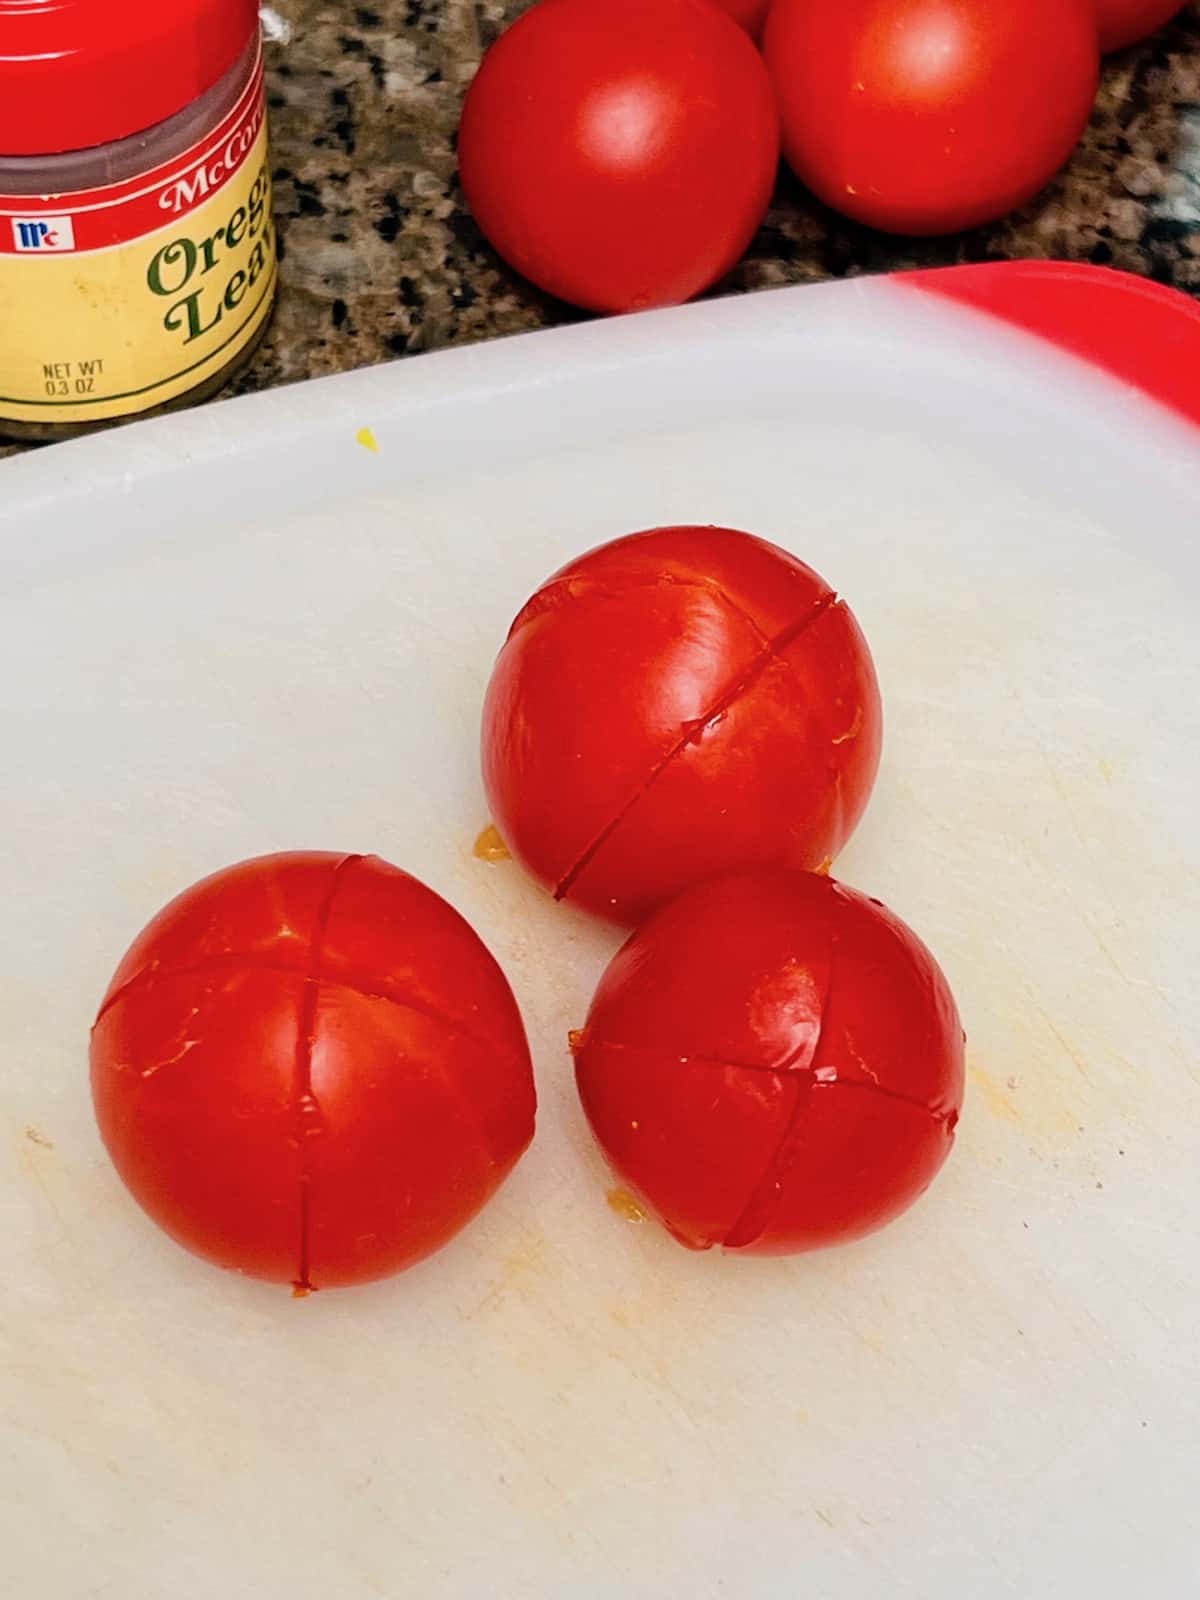 Fresh tomatoes with x cuts in the outer skin.